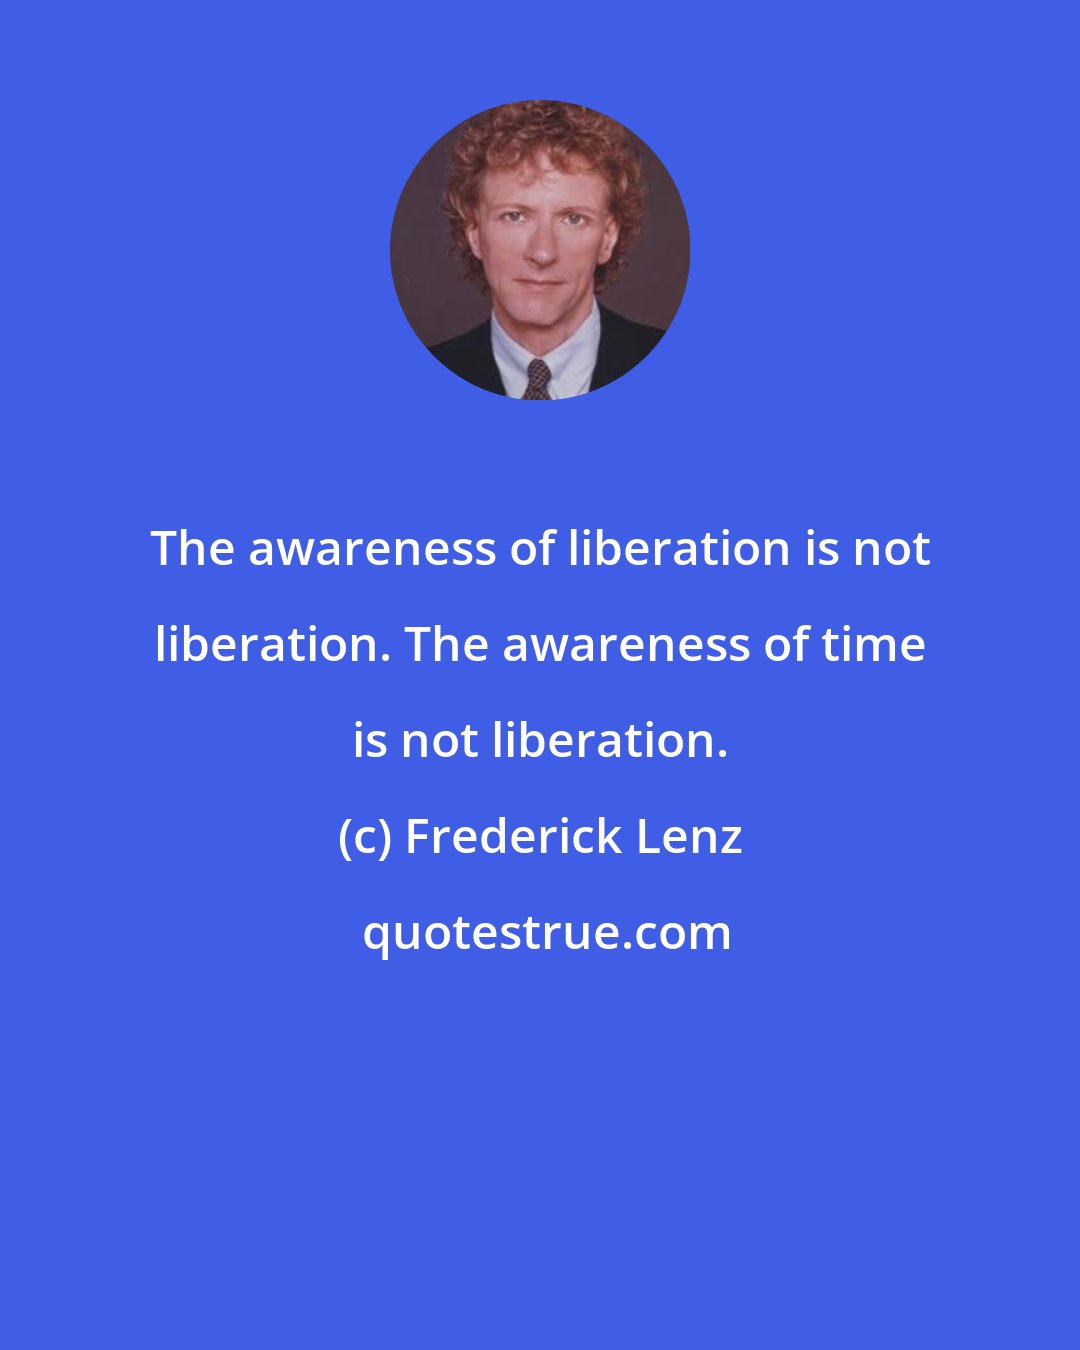 Frederick Lenz: The awareness of liberation is not liberation. The awareness of time is not liberation.